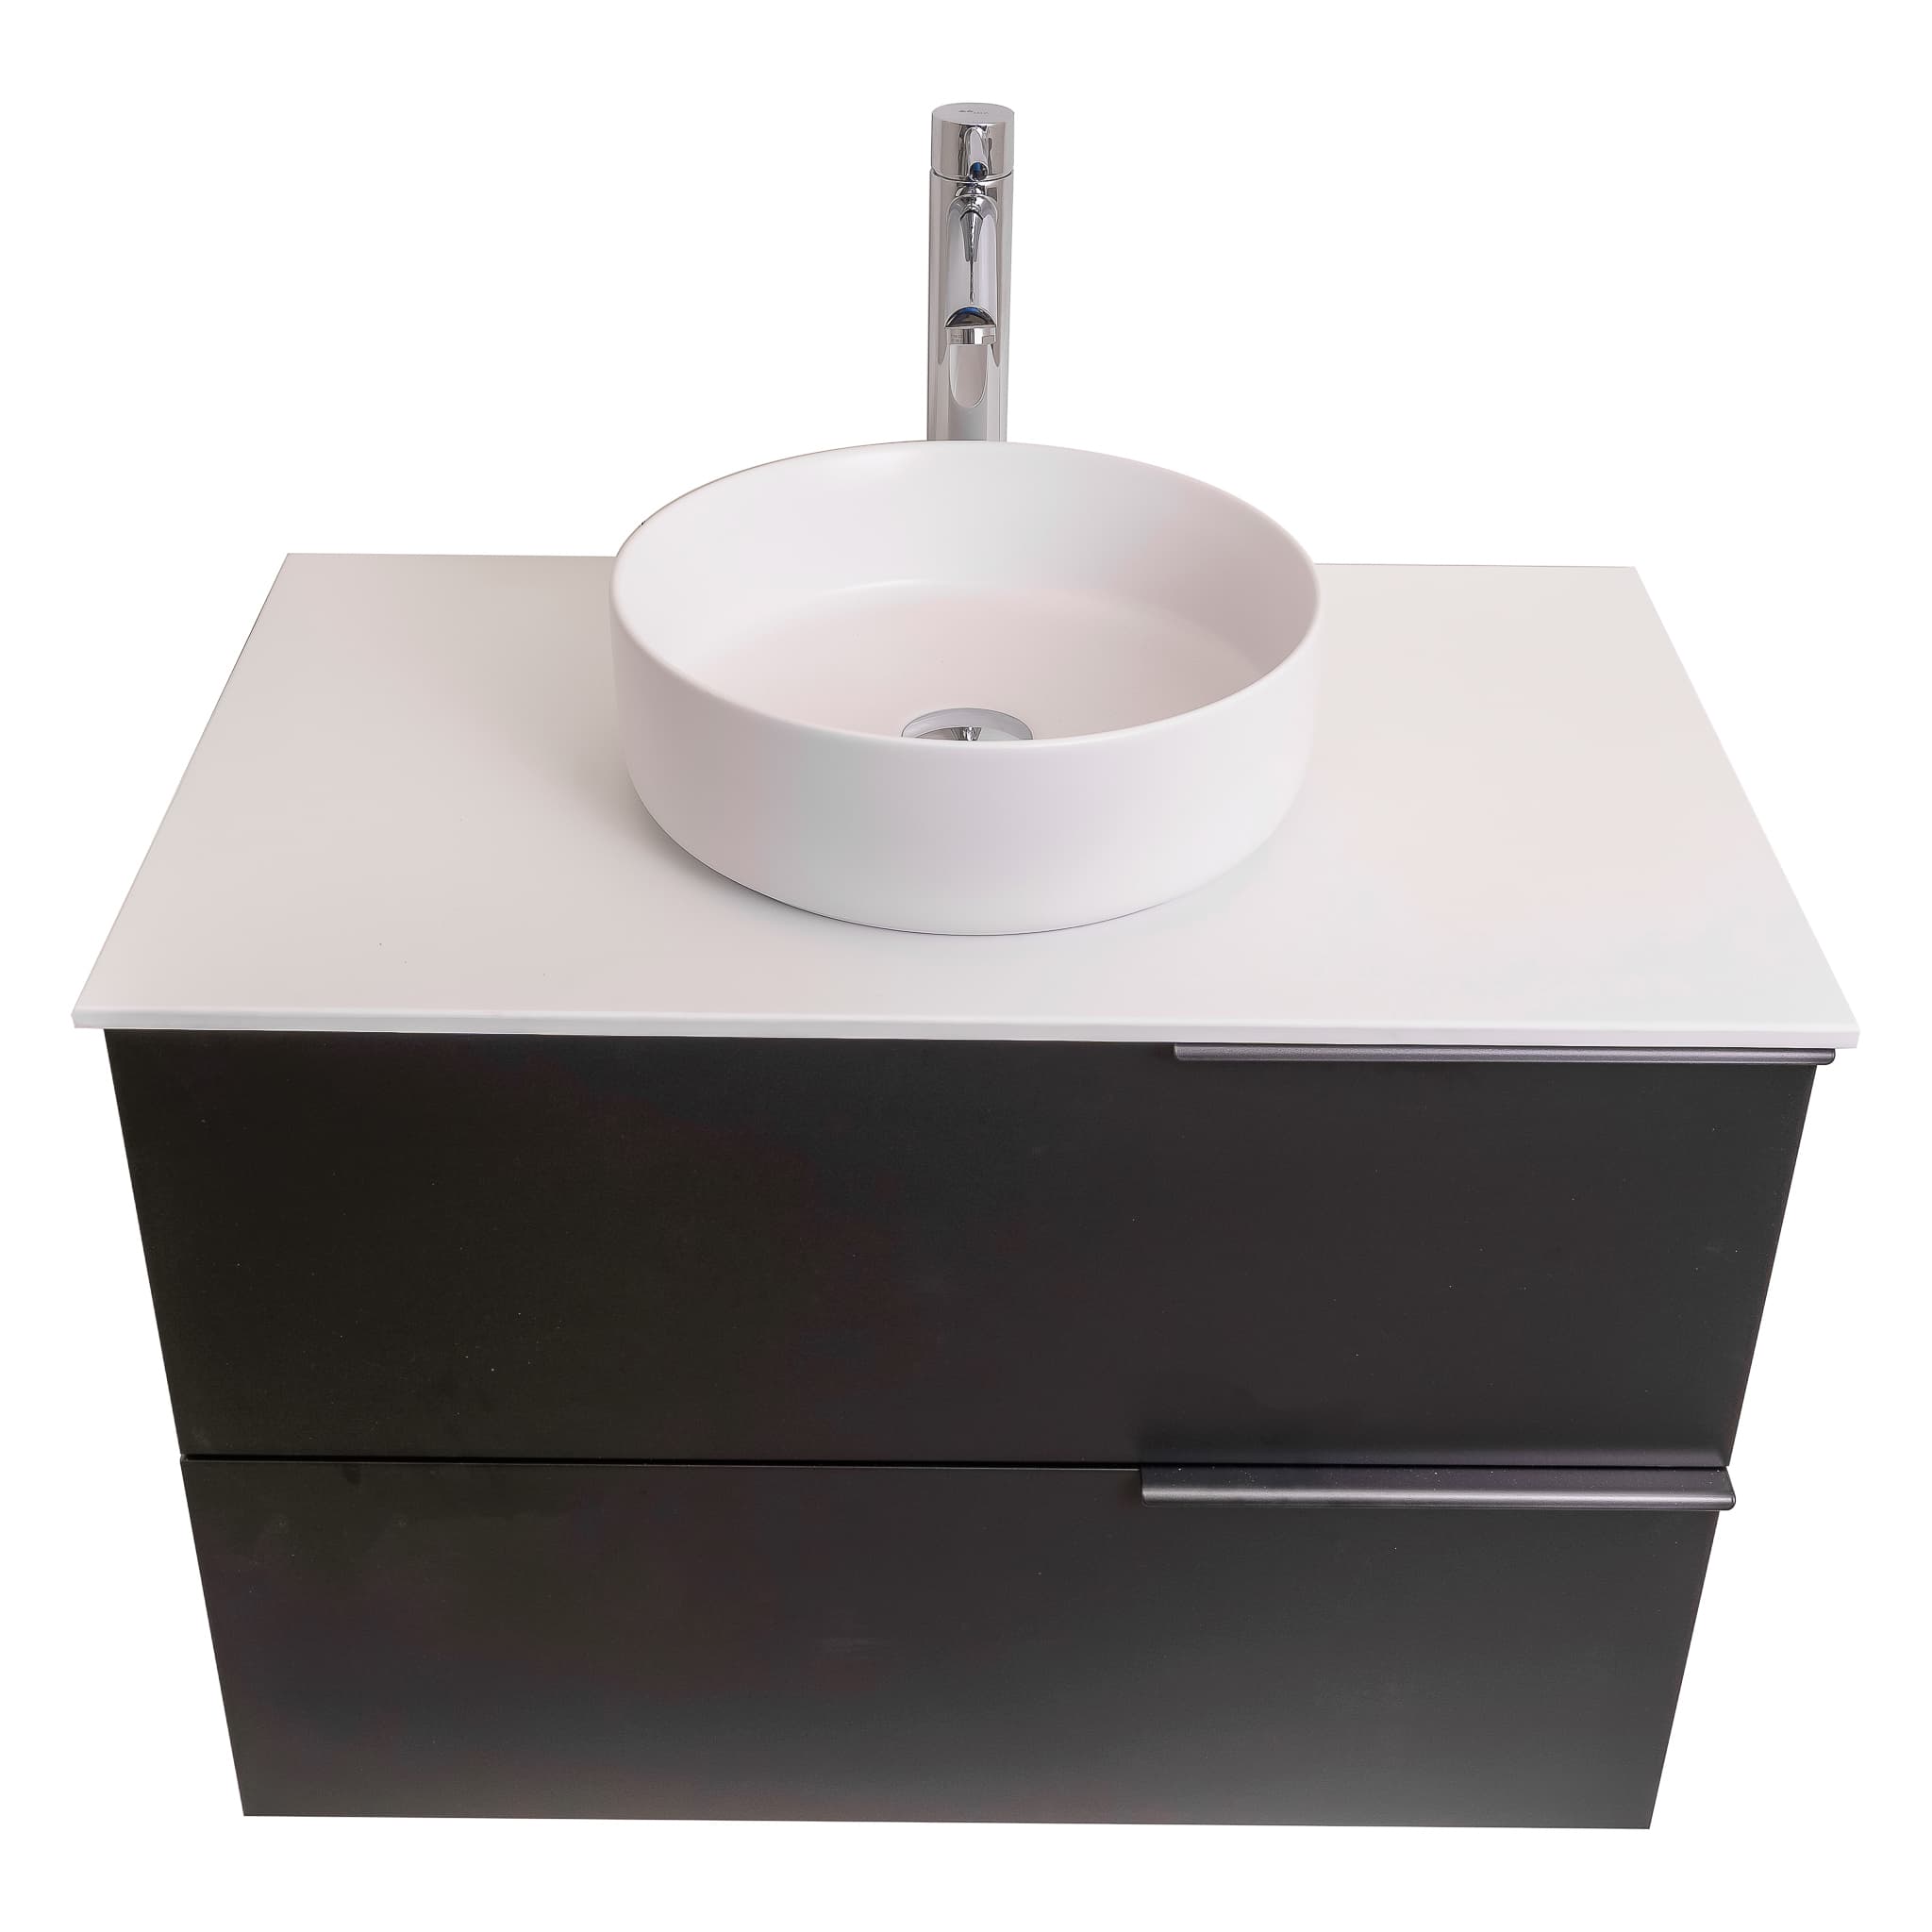 Mallorca 31.5 Matte Black Cabinet, Ares White Top And Ares White Ceramic Basin, Wall Mounted Modern Vanity Set